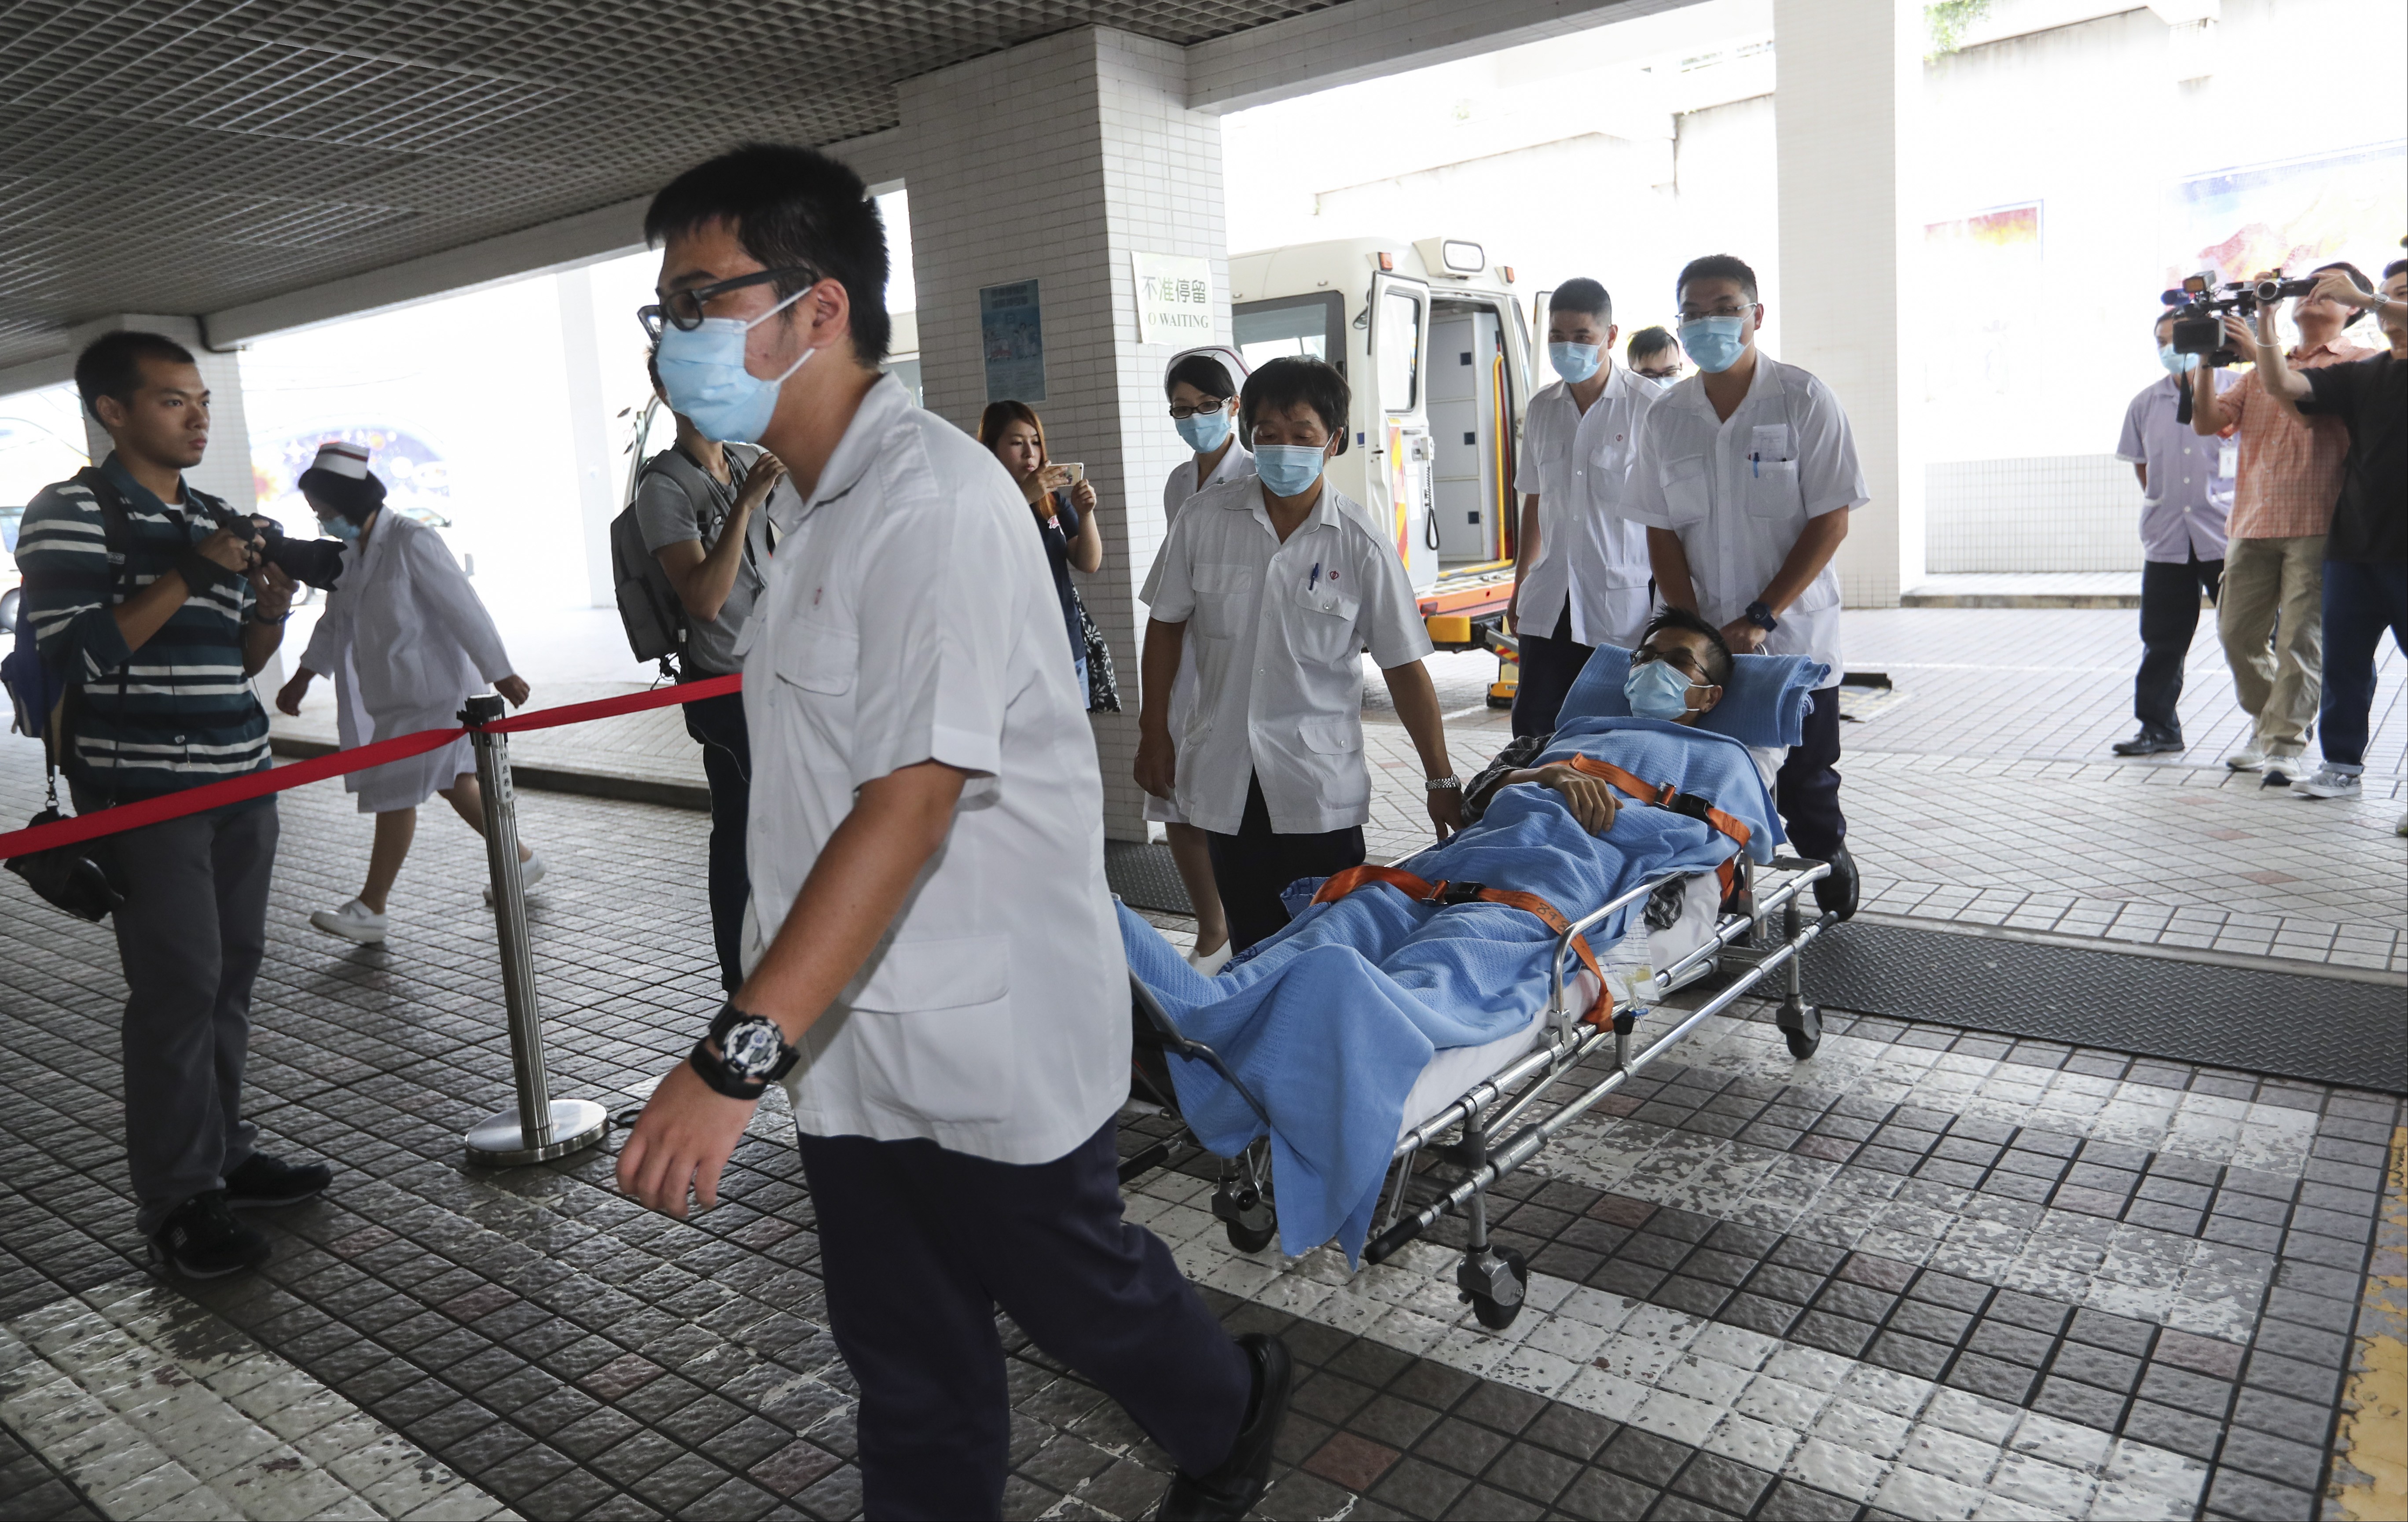 Patients from Queen Elizabeth Hospital are transferred to privately run St Teresa's Hospital in Kowloon City in July as part of a plan to ease overcrowding in the public health sector. Photo: Edward Wong